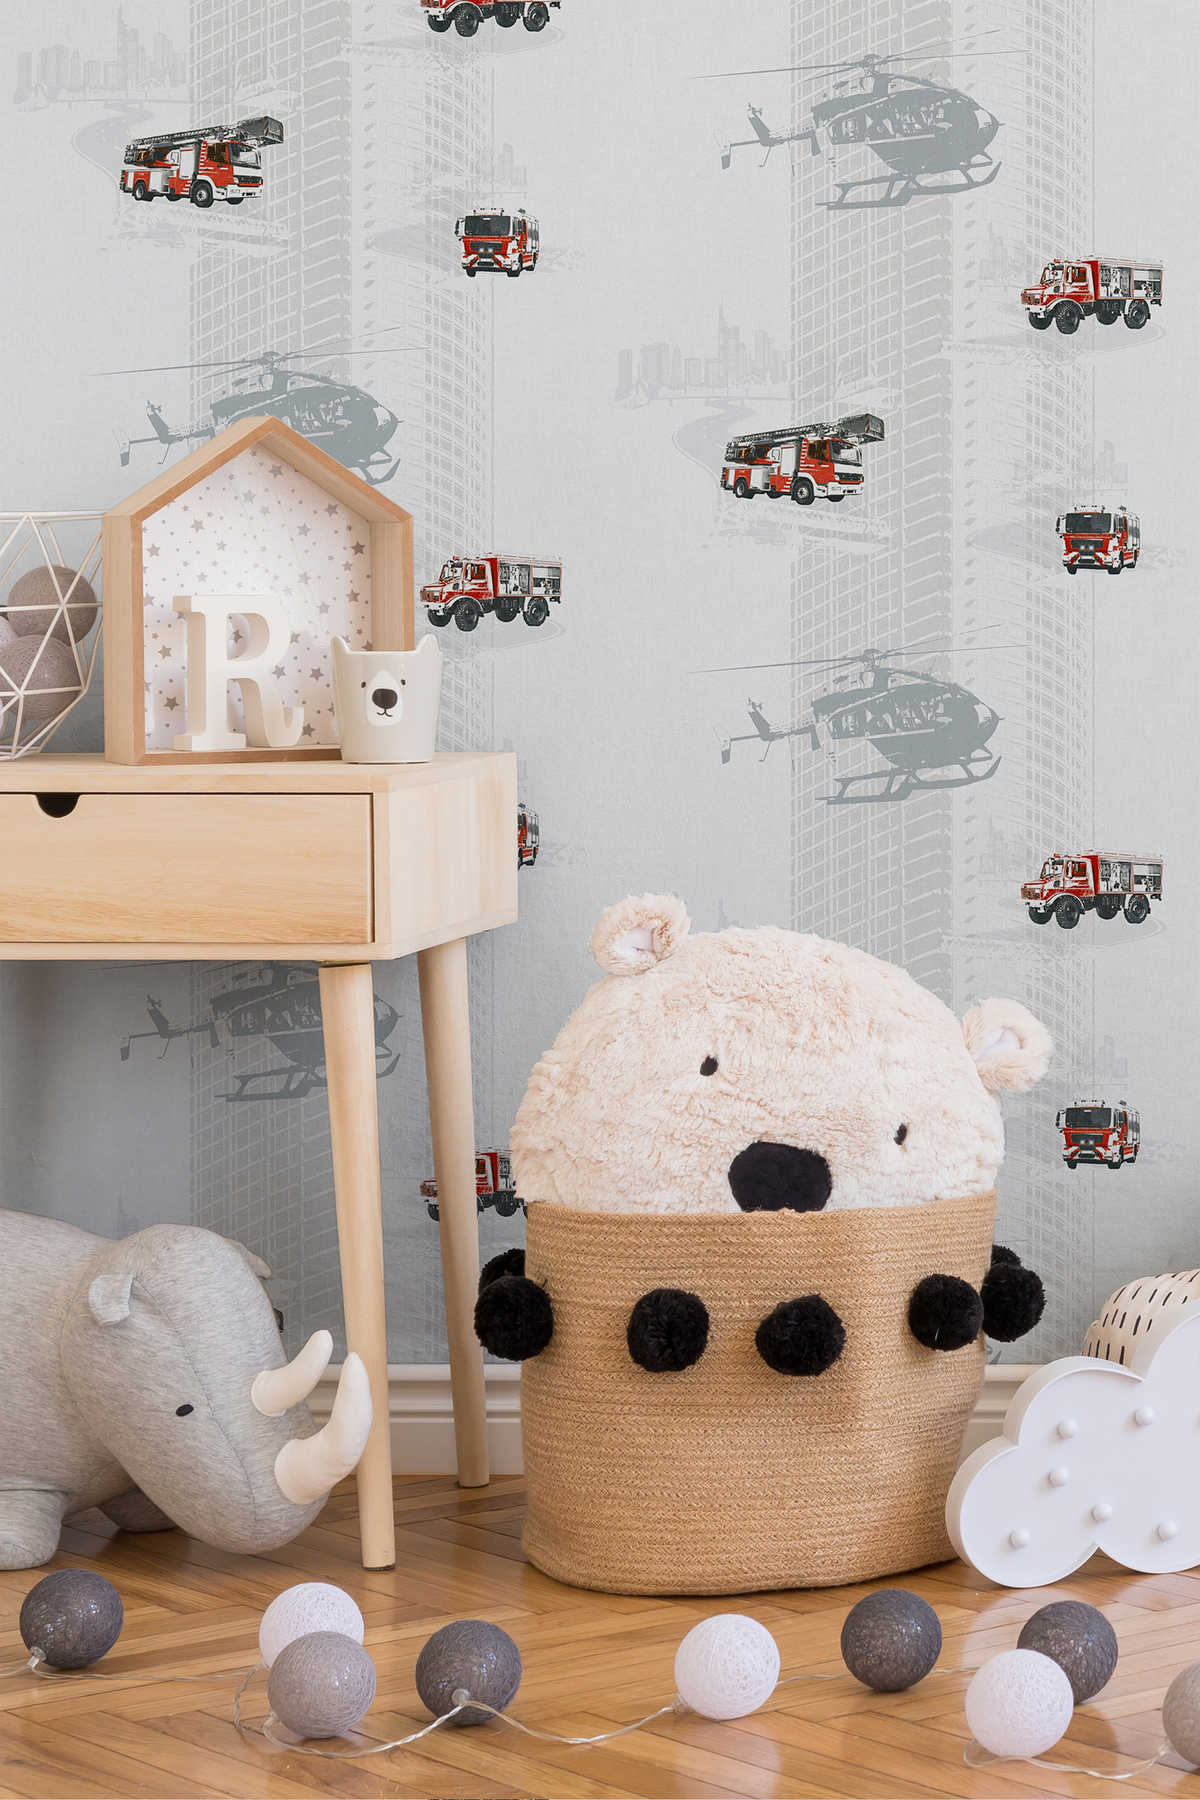             Nursery wallpaper fire department for boys - grey, red
        